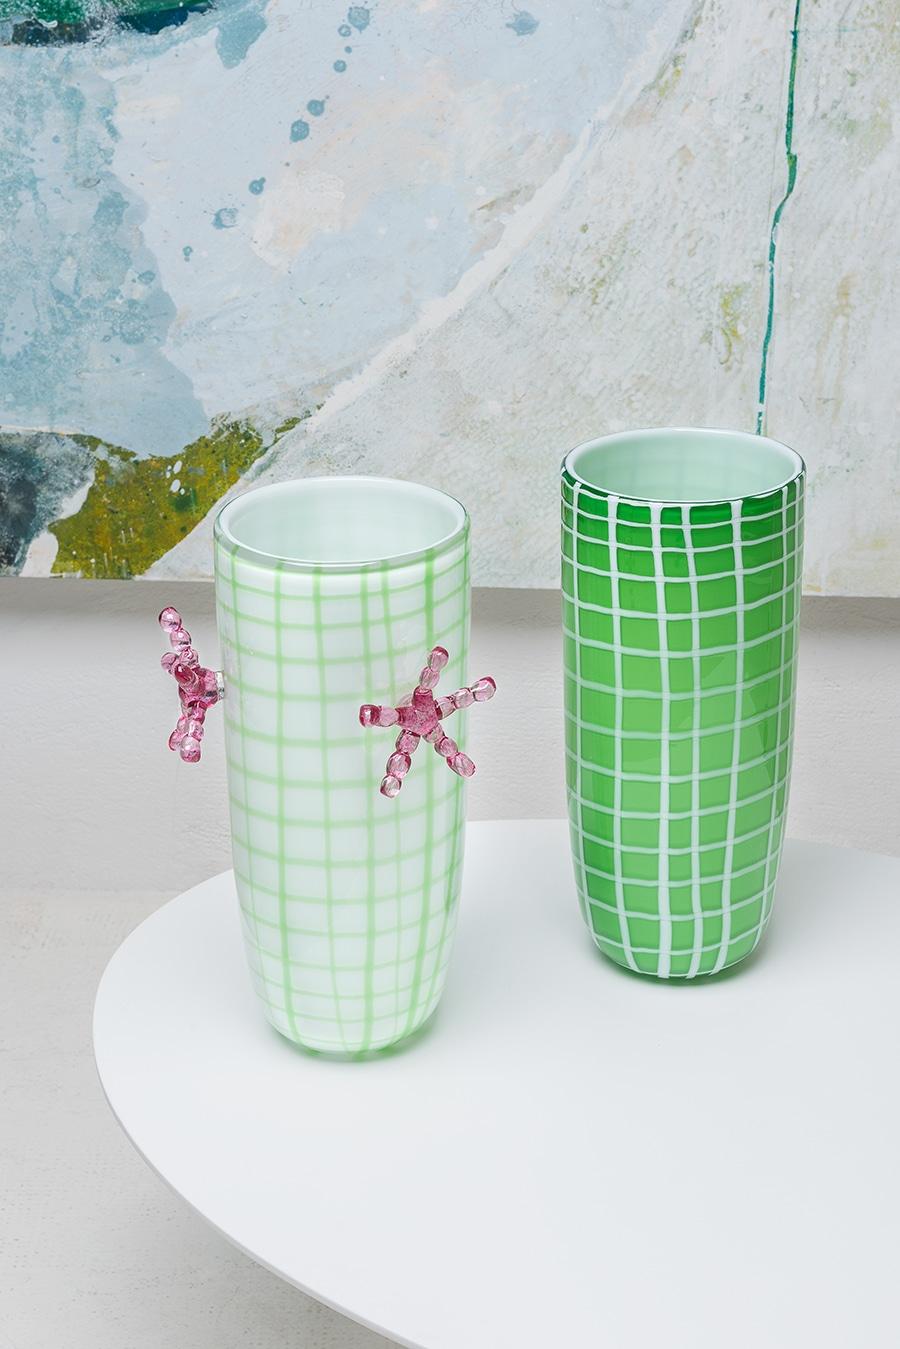 Part of a limited edition, this vase was designed by Elena Cutolo, student of legendary architect Ettore Sottsass. It was crafted of mouth-blown Murano glass and shaped in an elongated shape in white with an asymmetric net of crossing emerald green